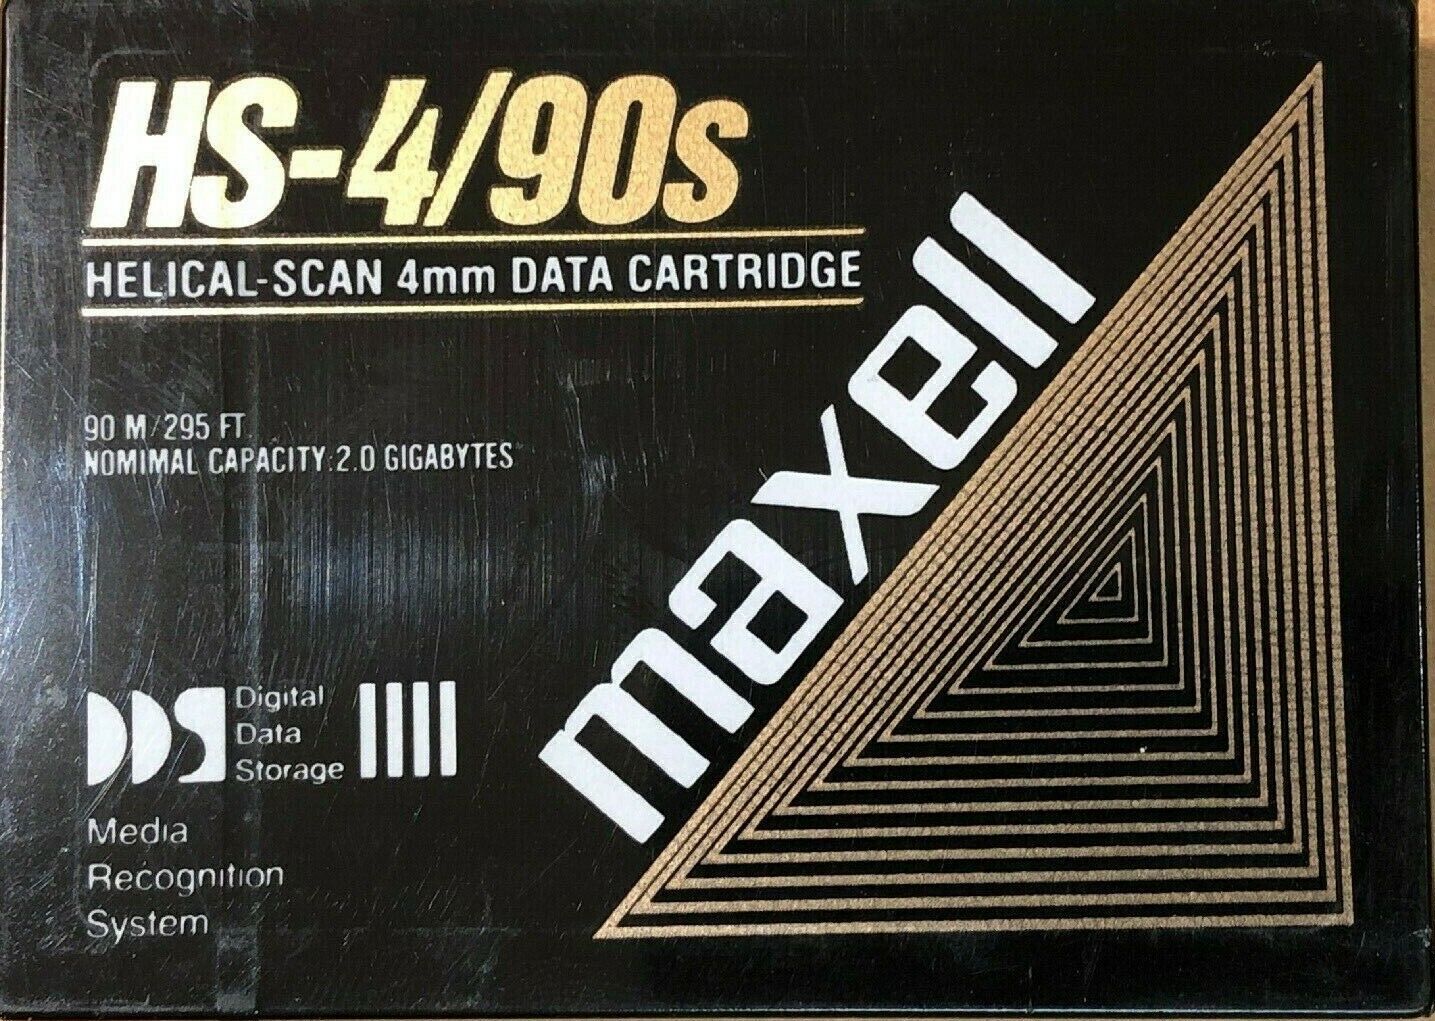 New Maxell HS-4/90s Helical Scan 4mm Data Cartridge 2GB 90m 295ft DDS Sealed.